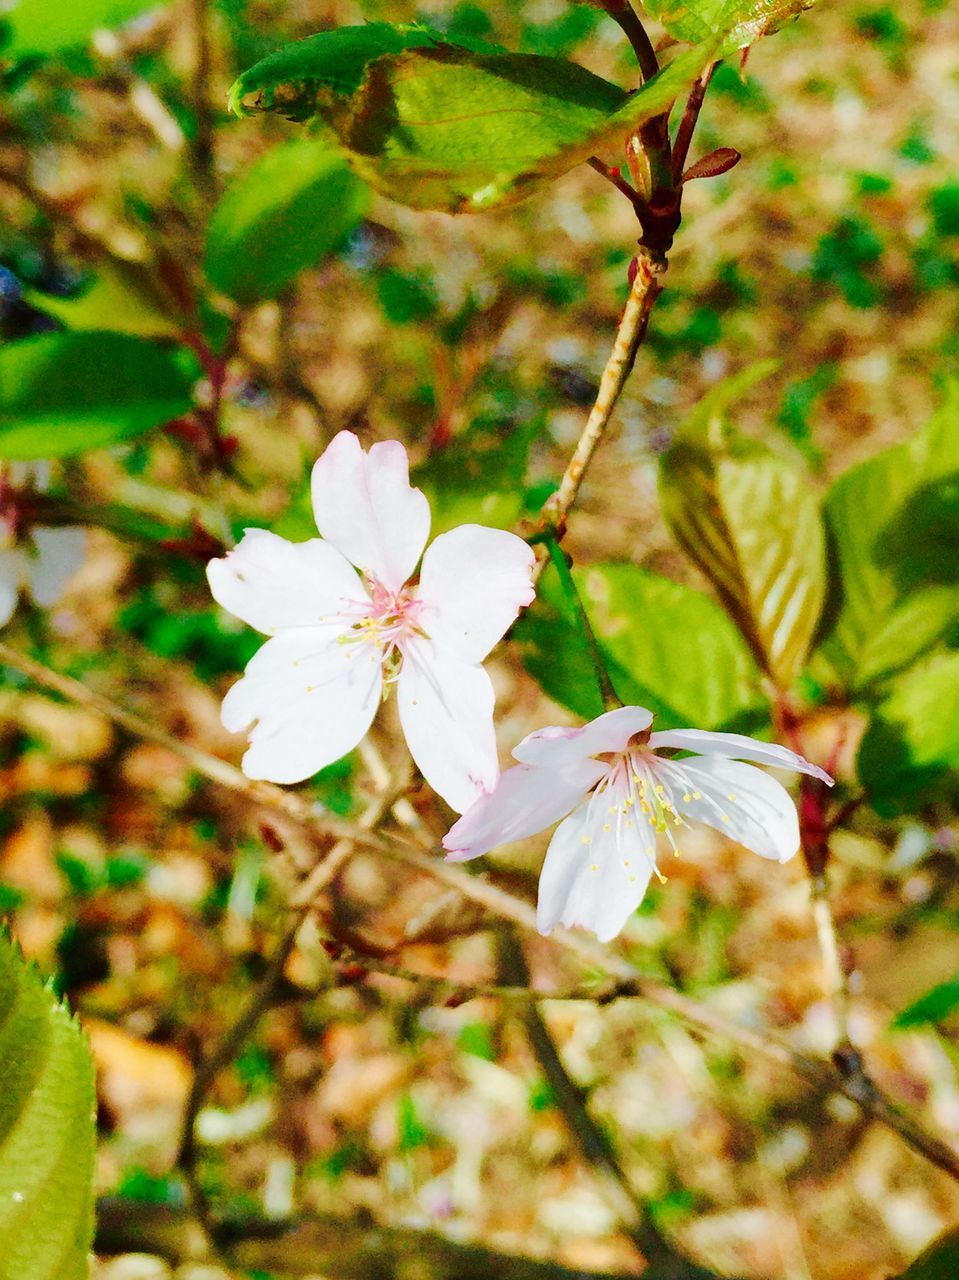 flower, growth, freshness, fragility, petal, leaf, close-up, focus on foreground, beauty in nature, nature, flower head, white color, stamen, branch, plant, blooming, blossom, in bloom, bud, outdoors